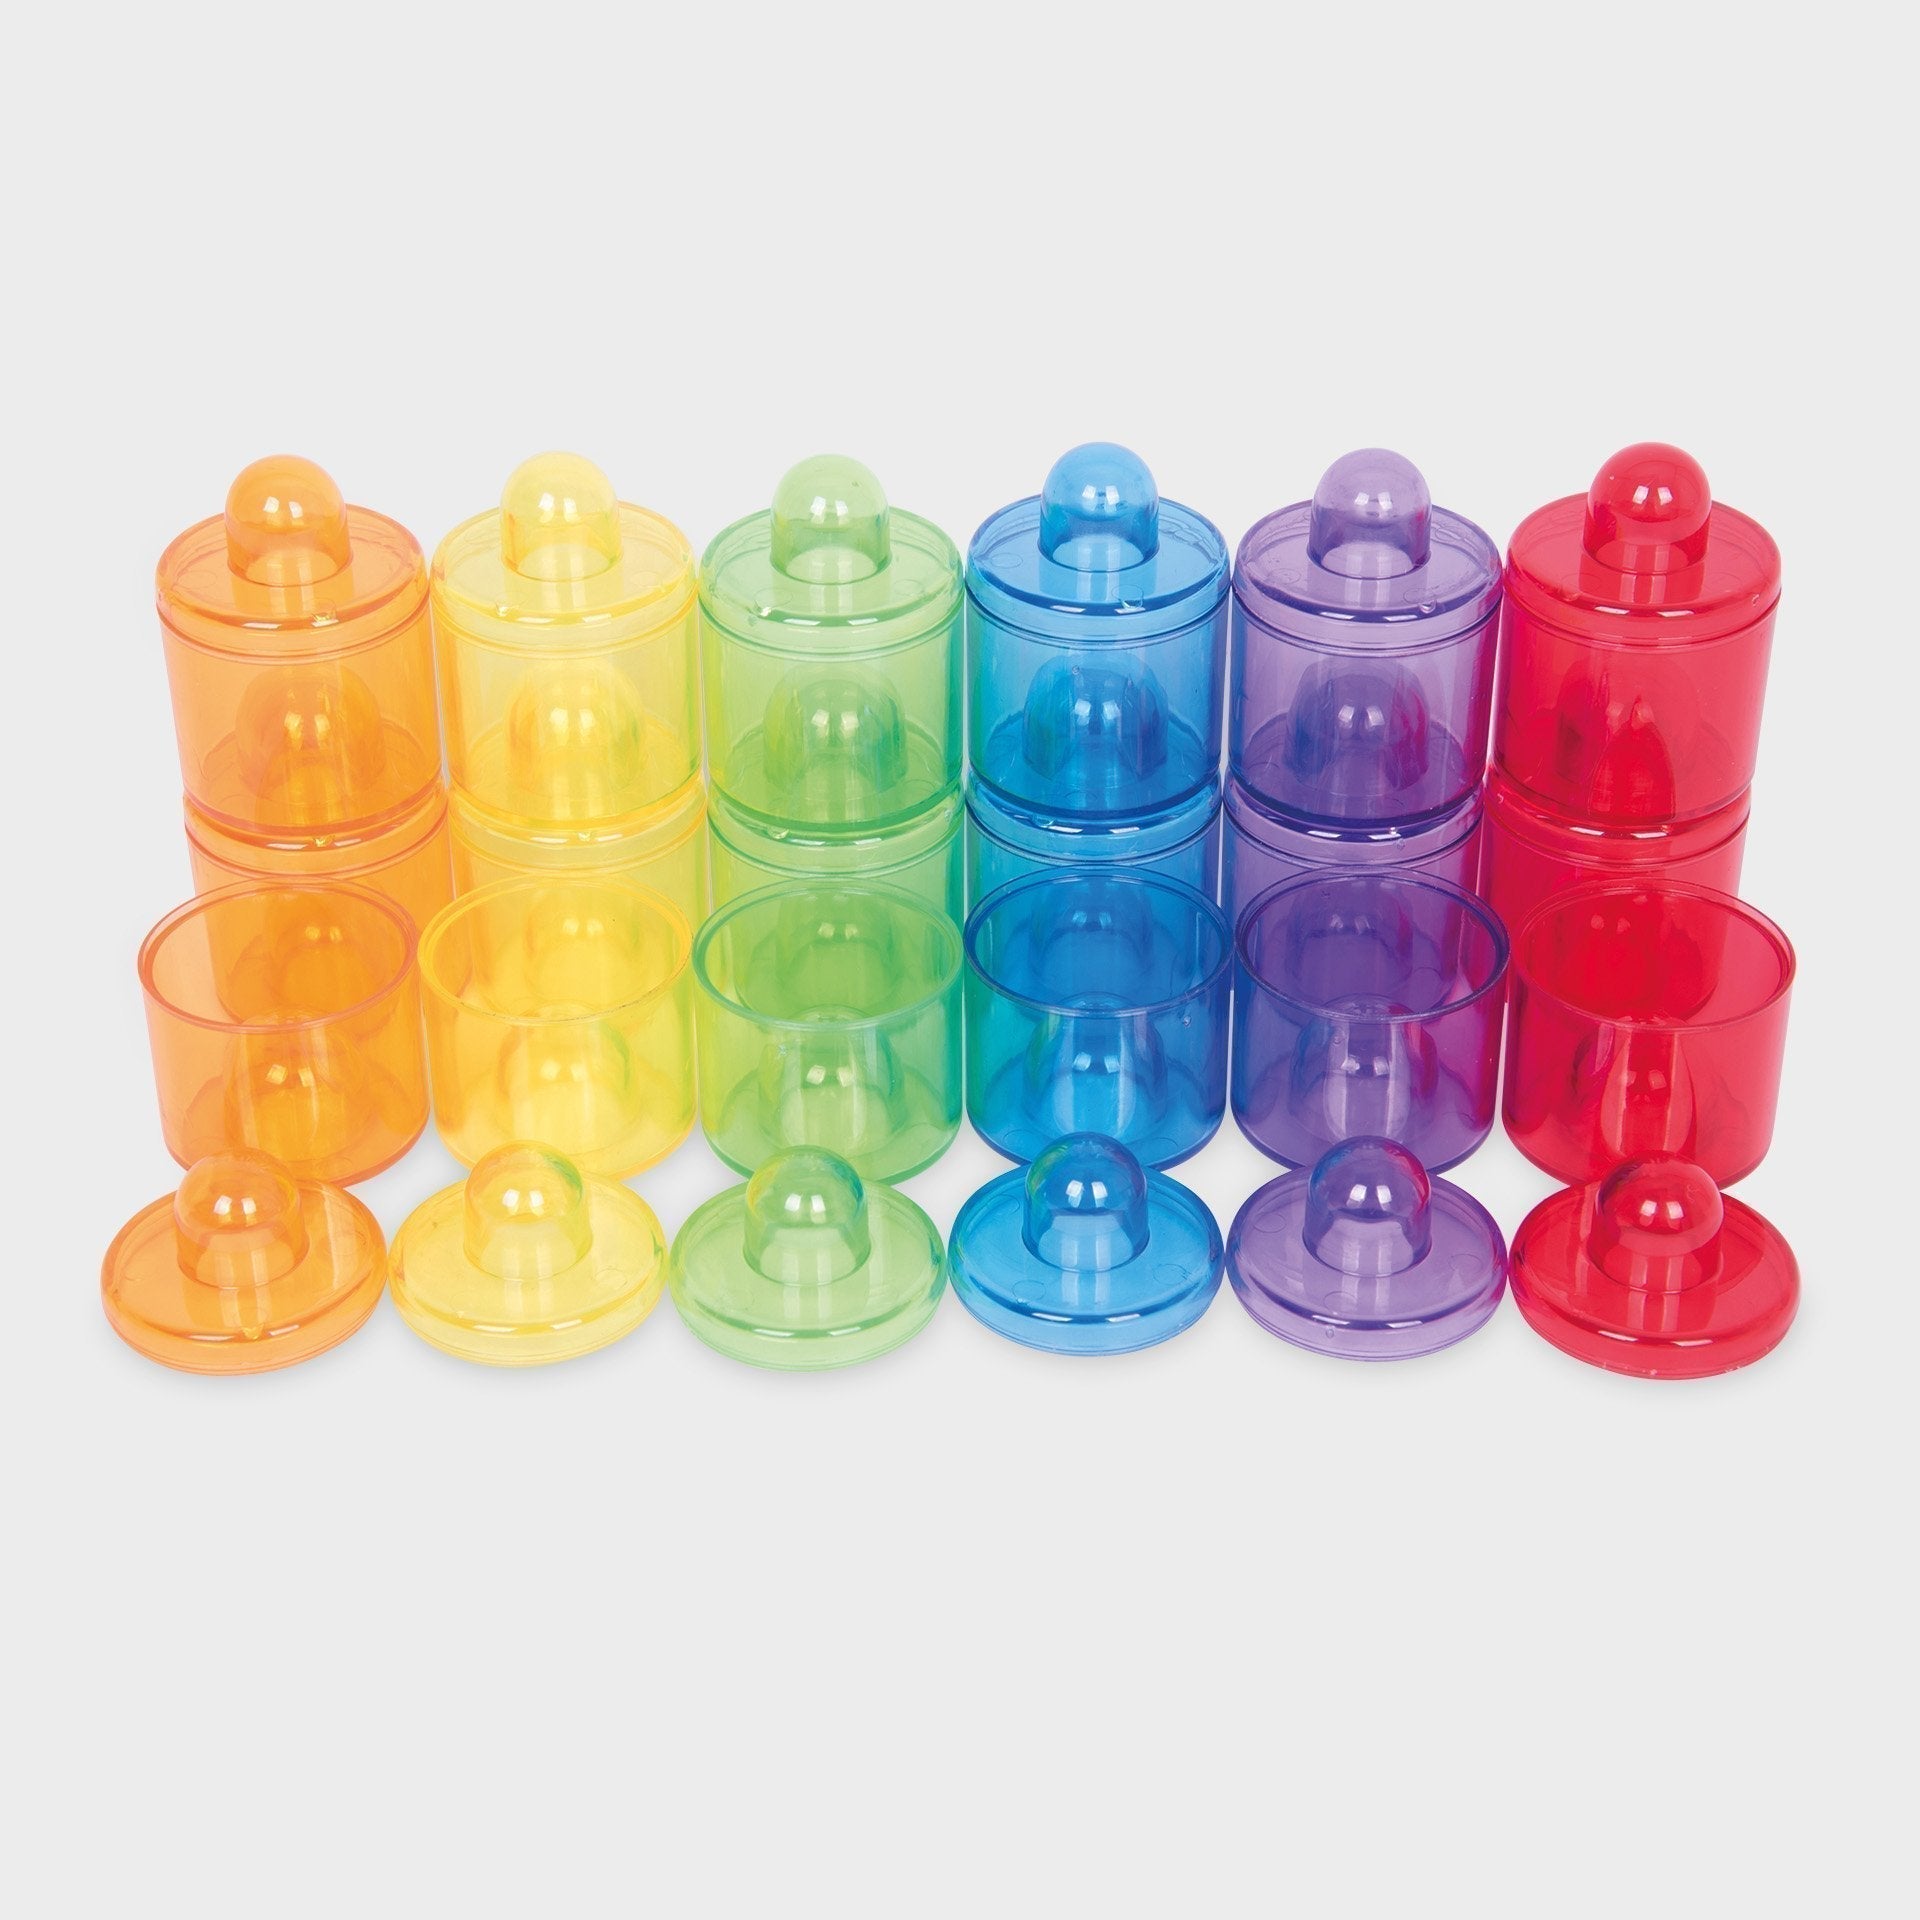 18 Piece Translucent Colour Pot Set, The Translucent Colour Pot Set are small stackable lidded pots in 6 translucent colours, ideal for use in exploration play, for colour mixing and matching, and as a stacking activity to engage logic and develop coordination. Colours match the Translucent Colour Jug Set so can be used together for extended play value.Our TickiT® Translucent Colour Pot Set contains eighteen small and stackable pots in six different translucent colours. Each pot has a lid so is ideal for fi